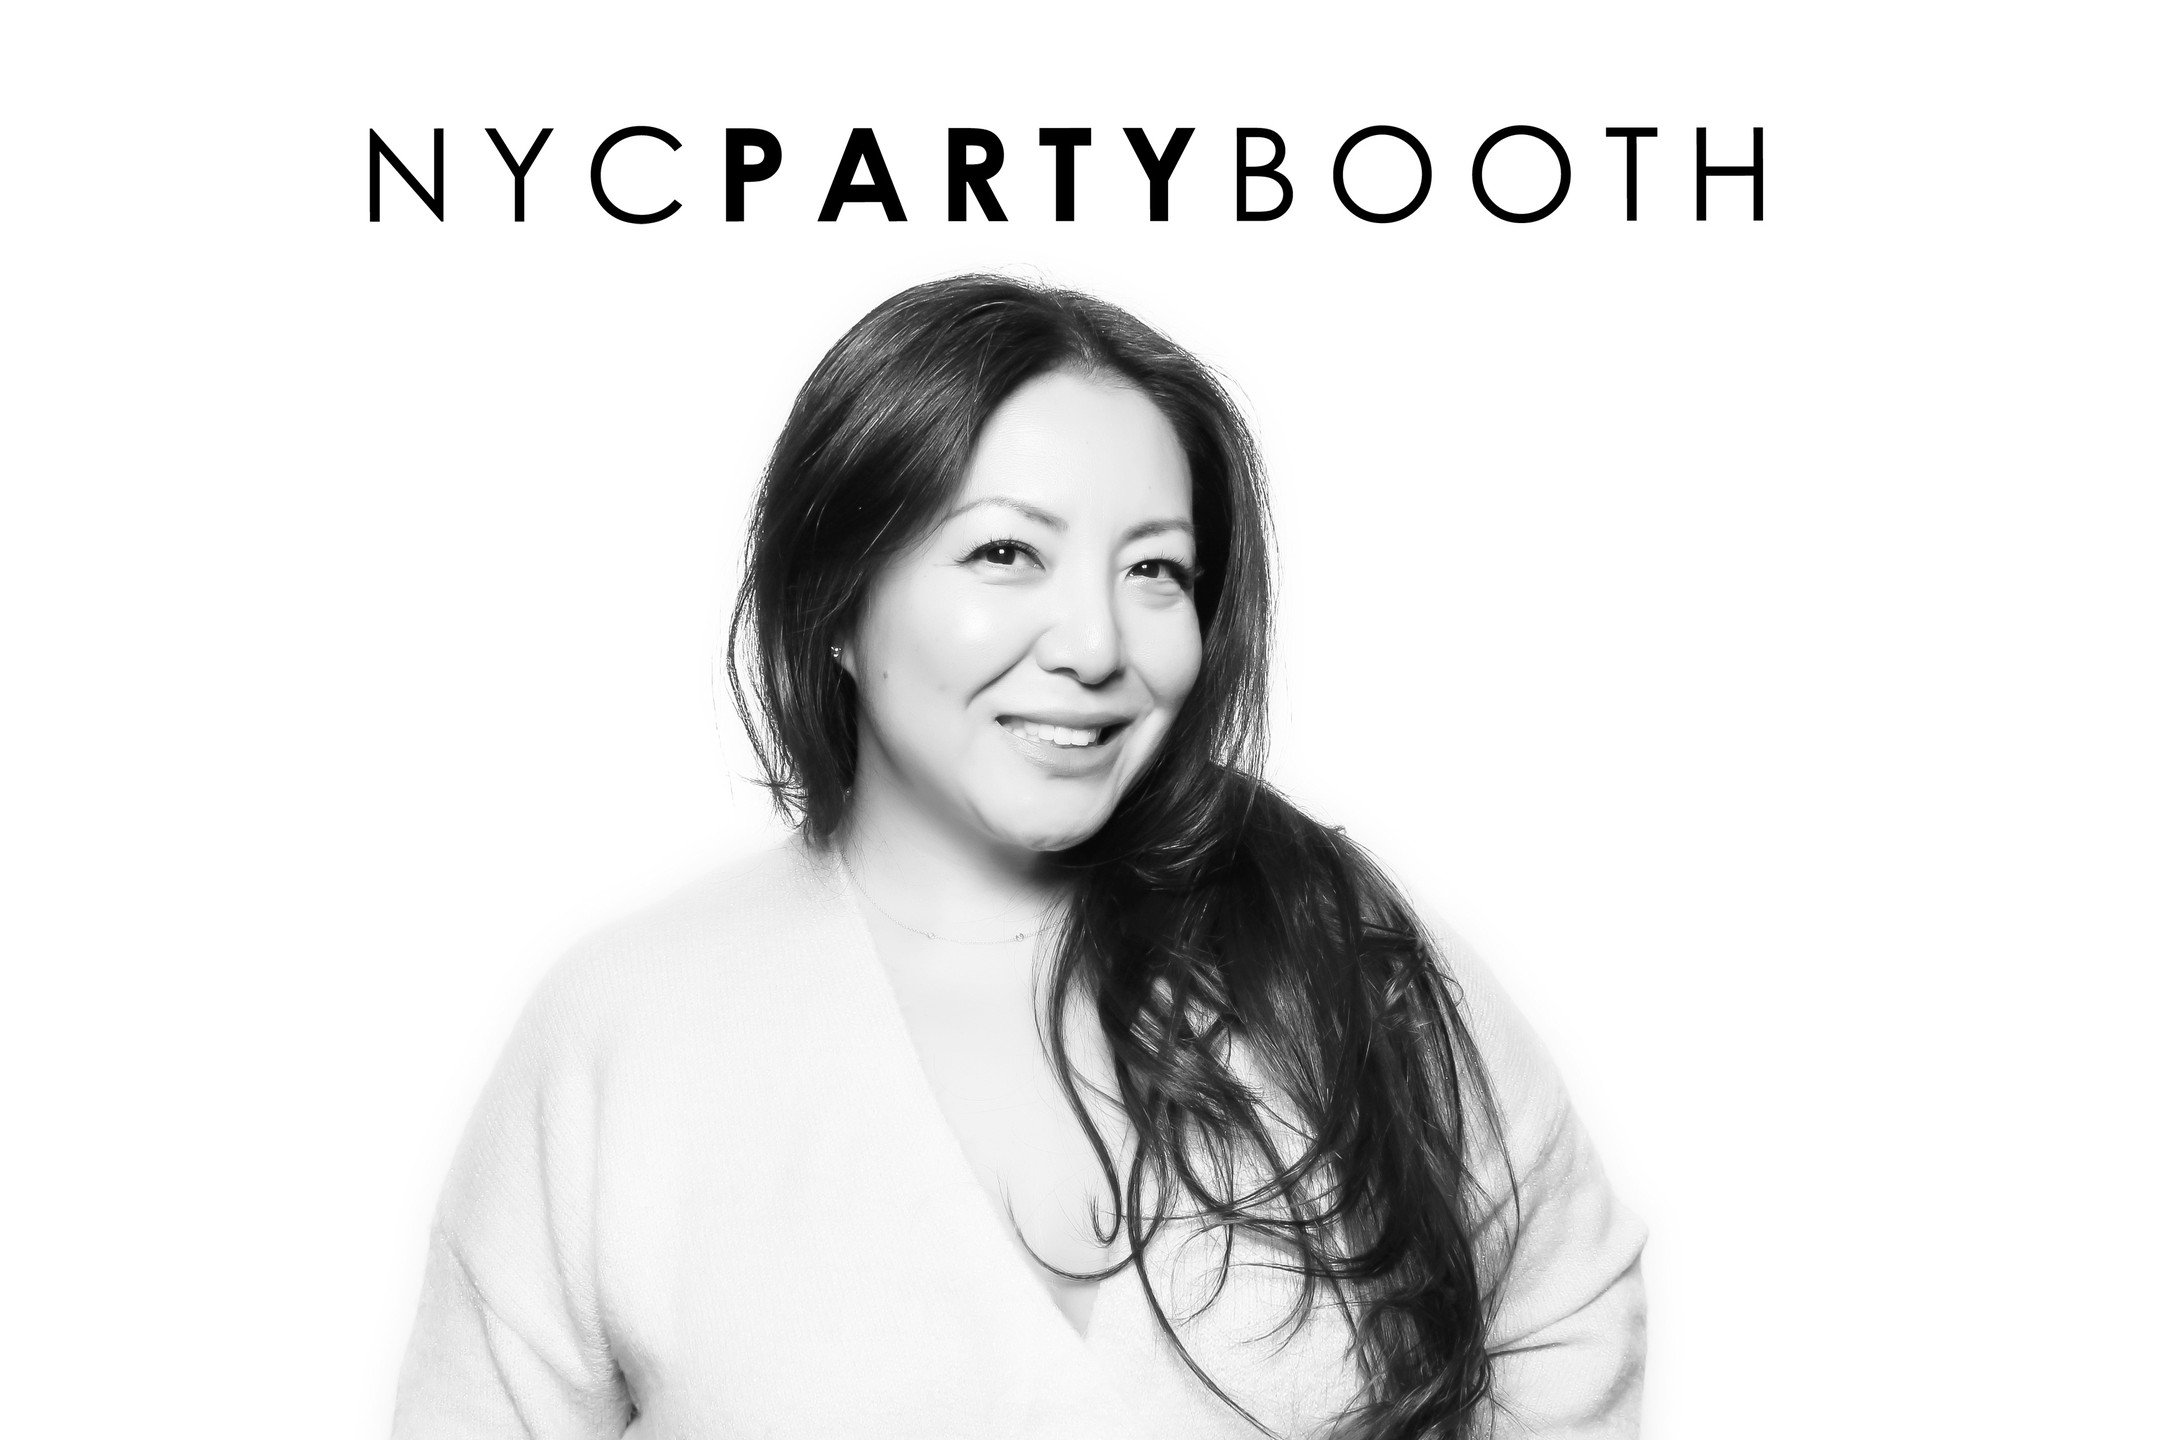 What makes our glam photo booths so popular? We are going to only talk about the two reasons. Glam photo booths have surged in popularity for several reasons but only NYC Party Booth can produce the high quality immaculate photos for your guests. (Op